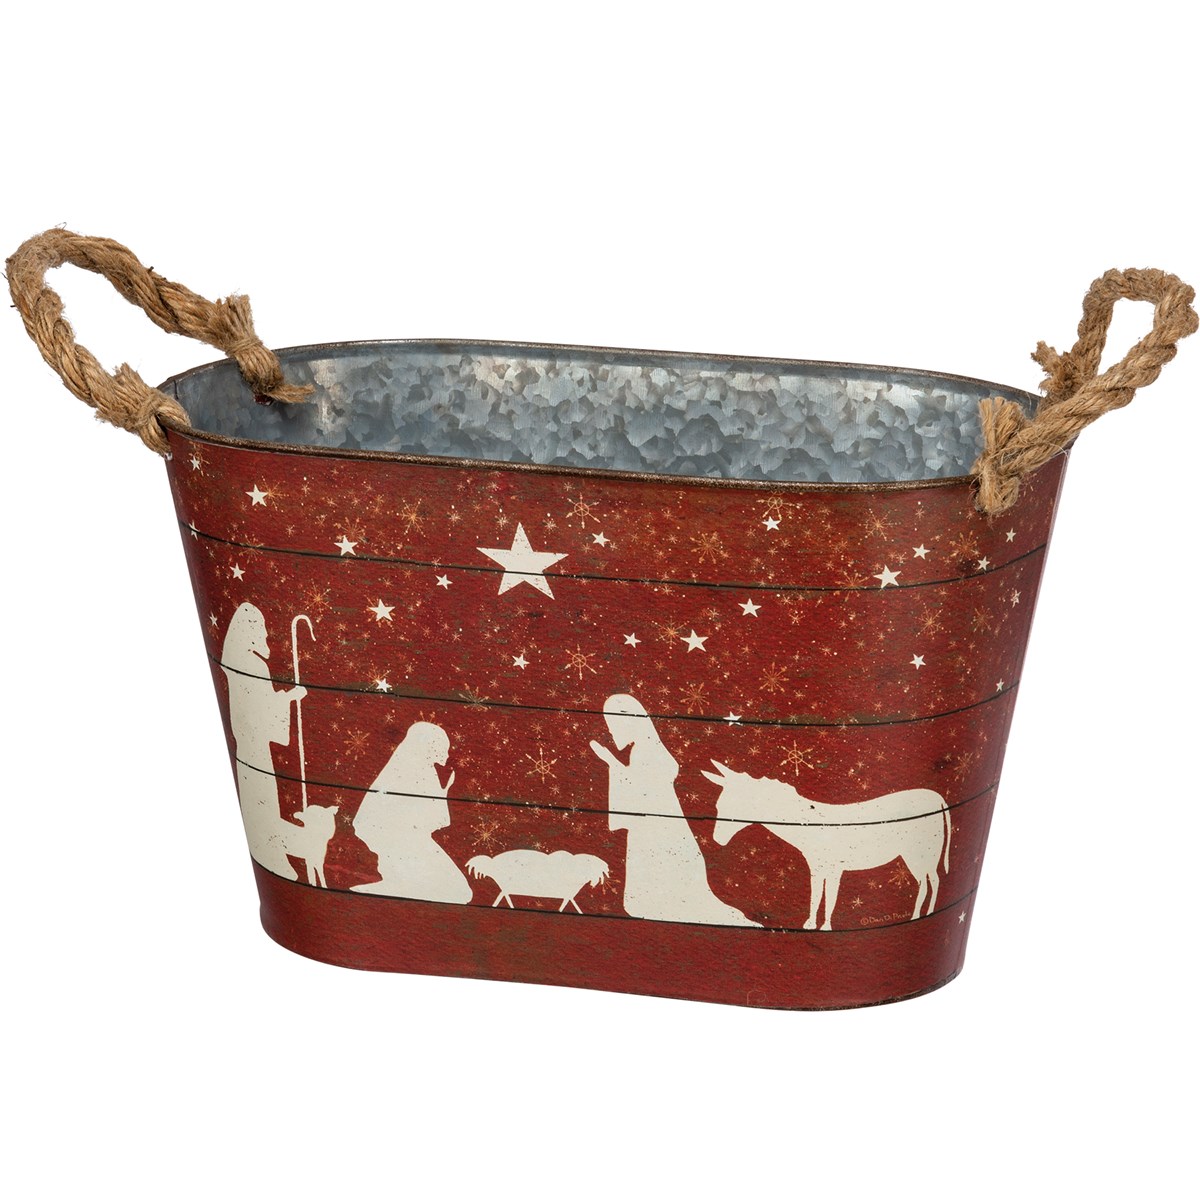 For Unto Us A Child Is Born Bucket Set - Metal, Paper